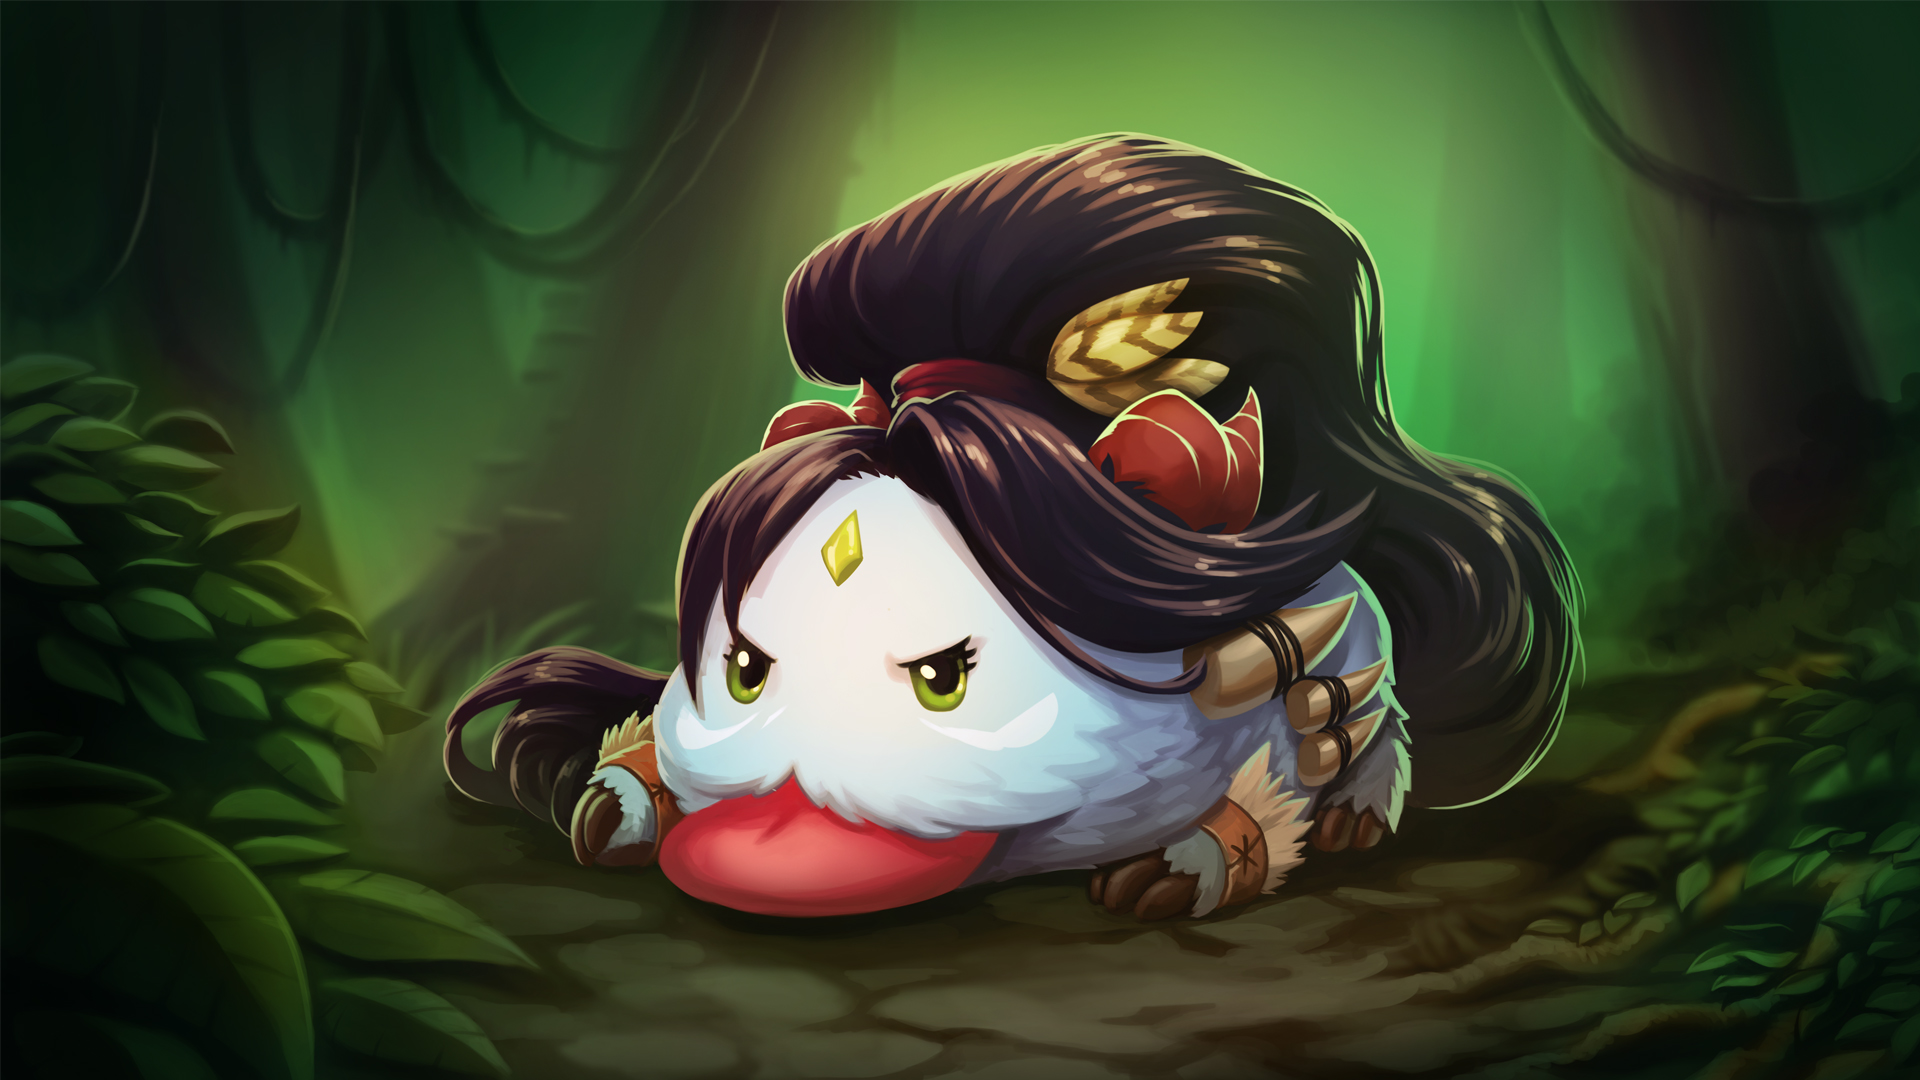 Nothing found for 2015 02 17 Champion Poros Wallpapers For Fiesta De